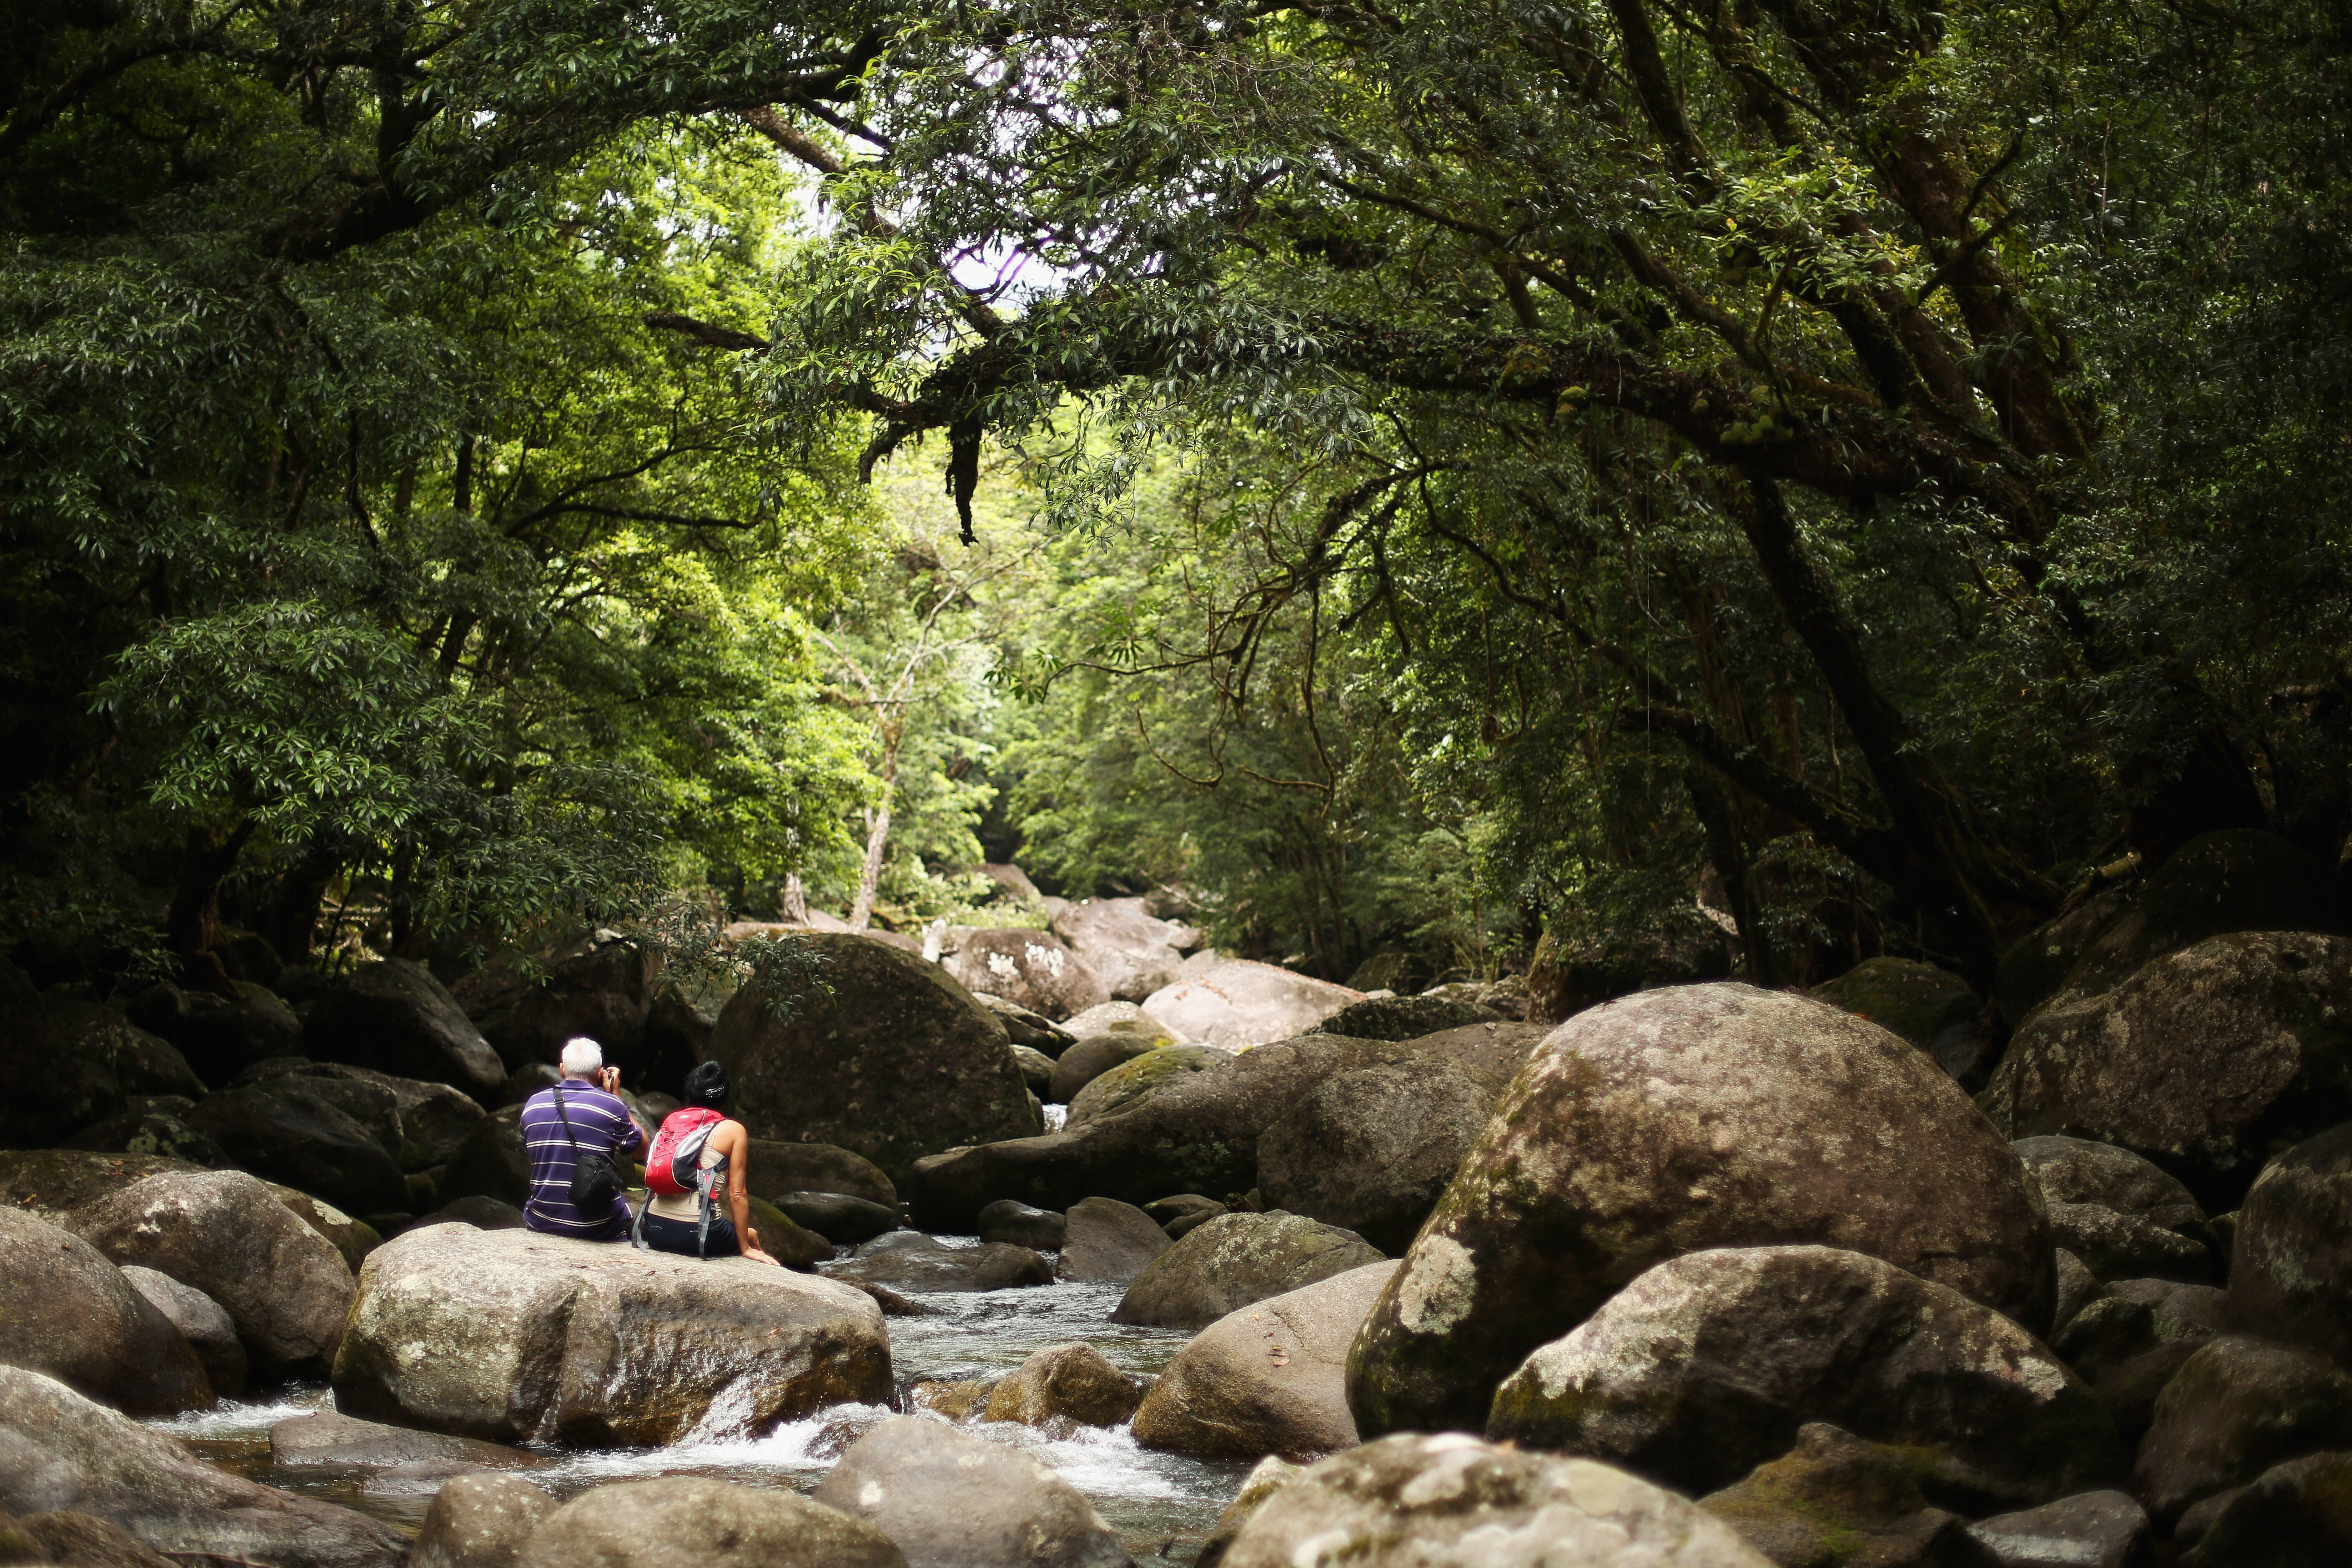 CAIRNS, AUSTRALIA - NOVEMBER 15:  A couple sit on the rocks of the Mossman river in world heritage listed daintree rainforest on November 15, 2012 in Mossman Gorge, Australia. Located in Far North Queensland, the Cairns region is one of Australia’s most